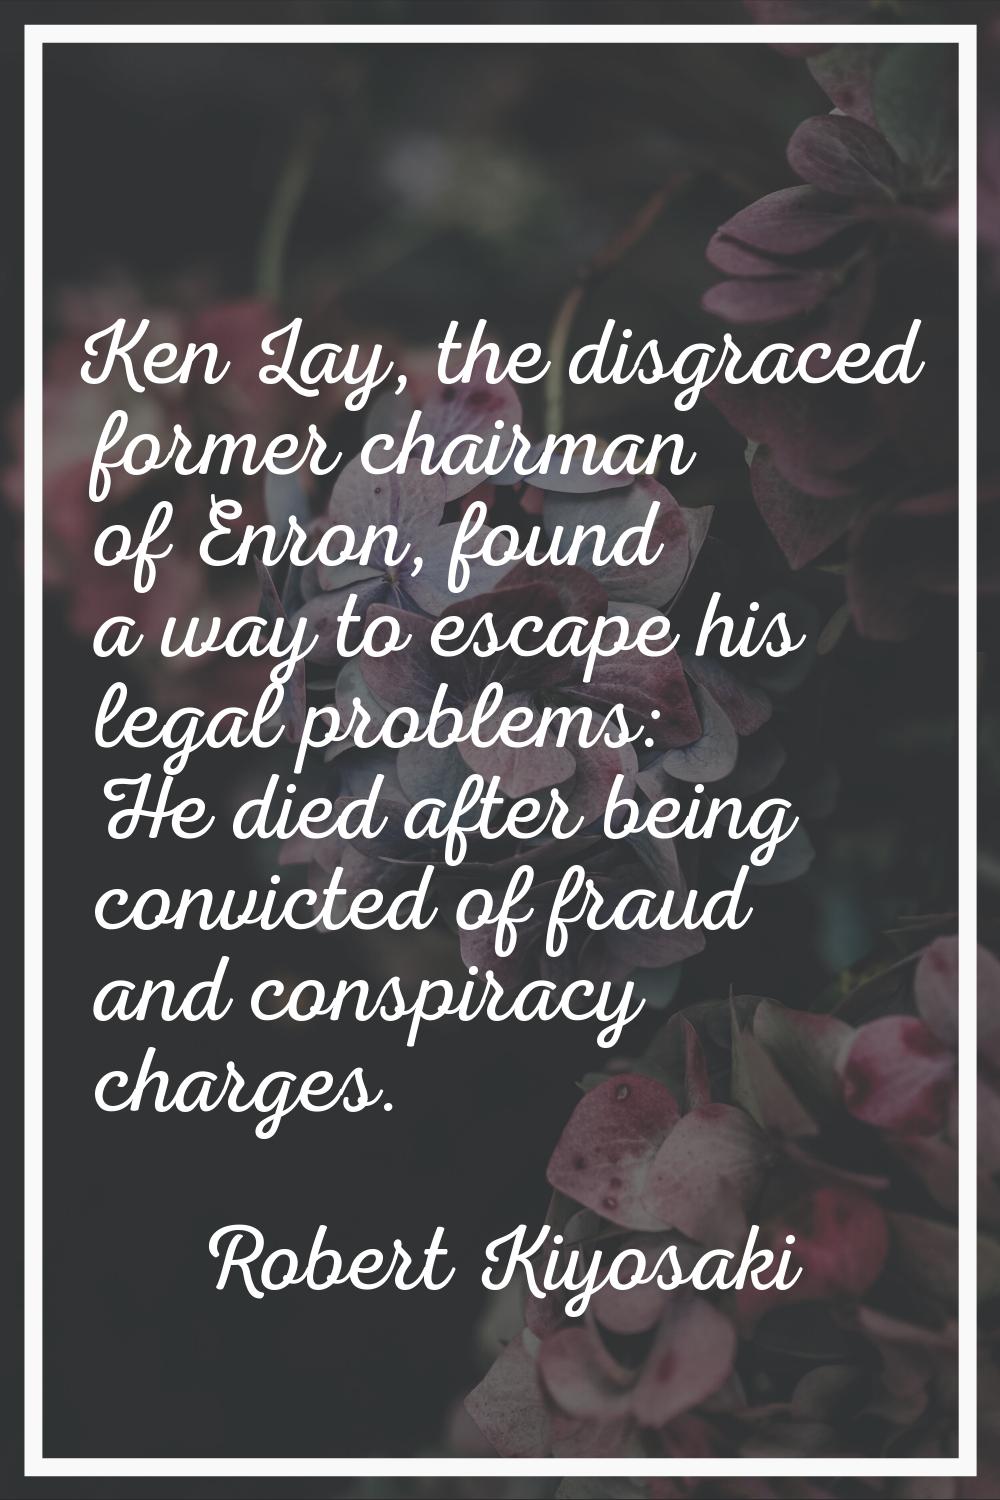 Ken Lay, the disgraced former chairman of Enron, found a way to escape his legal problems: He died 